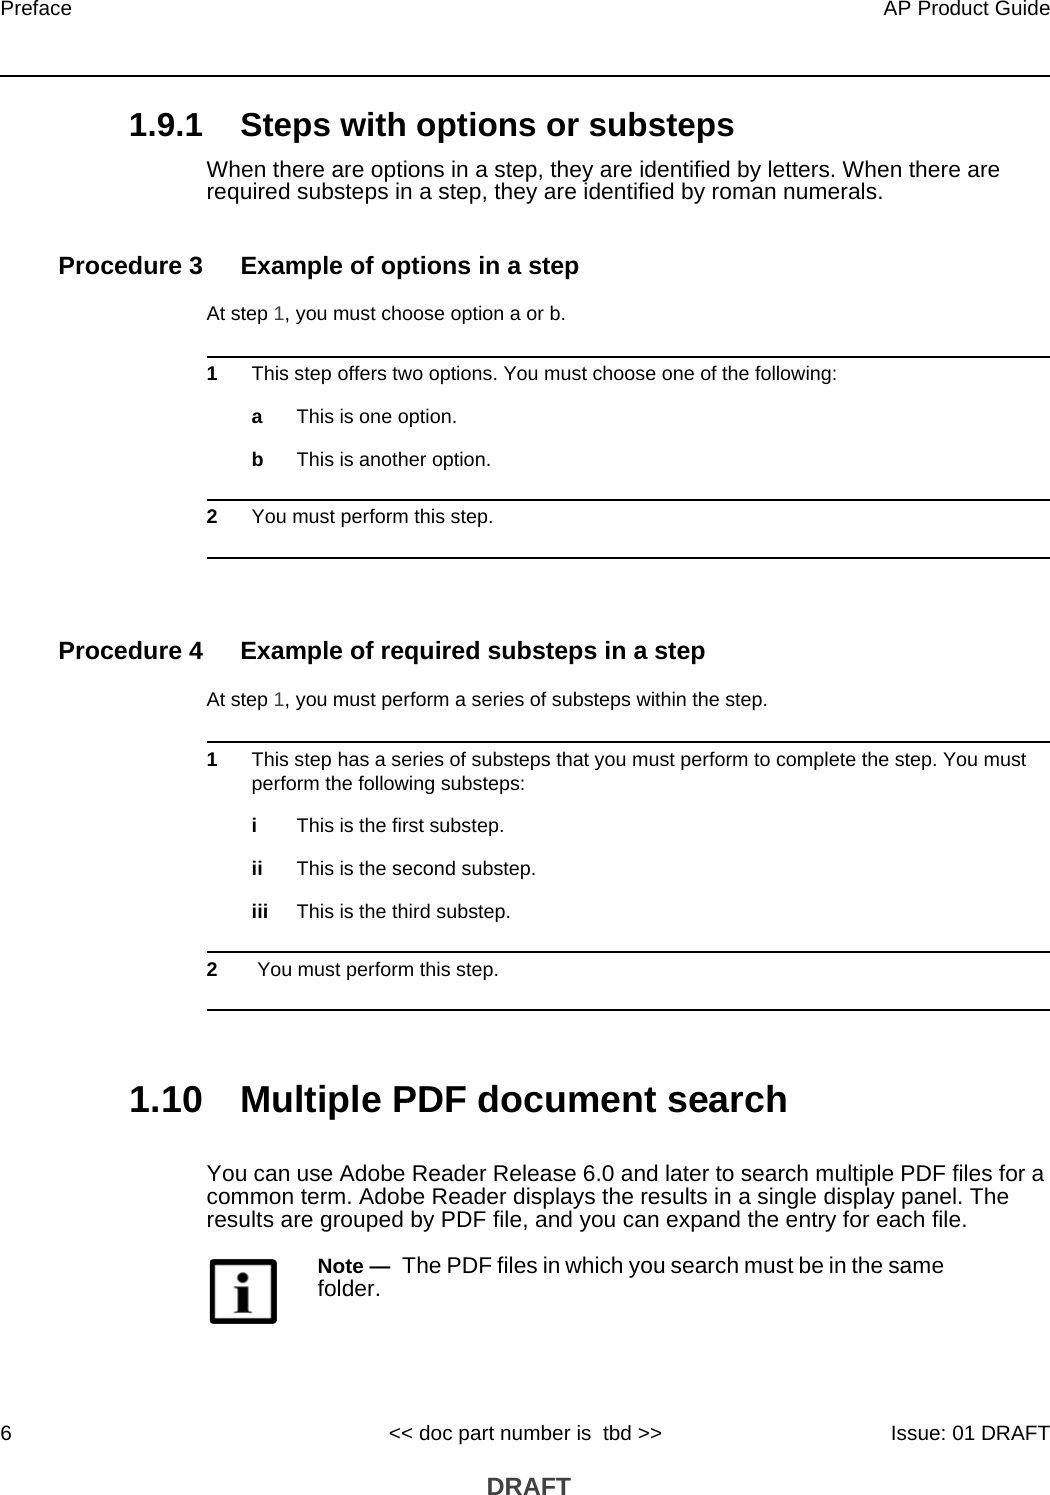 Preface6AP Product Guide&lt;&lt; doc part number is  tbd &gt;&gt; Issue: 01 DRAFT DRAFT1.9.1 Steps with options or substepsWhen there are options in a step, they are identified by letters. When there are required substeps in a step, they are identified by roman numerals.Procedure 3 Example of options in a stepAt step 1, you must choose option a or b. 1This step offers two options. You must choose one of the following:aThis is one option.bThis is another option.2You must perform this step.Procedure 4 Example of required substeps in a stepAt step 1, you must perform a series of substeps within the step. 1This step has a series of substeps that you must perform to complete the step. You must perform the following substeps:iThis is the first substep.ii This is the second substep.iii This is the third substep.2 You must perform this step.1.10 Multiple PDF document searchYou can use Adobe Reader Release 6.0 and later to search multiple PDF files for a common term. Adobe Reader displays the results in a single display panel. The results are grouped by PDF file, and you can expand the entry for each file.Note —  The PDF files in which you search must be in the same folder.